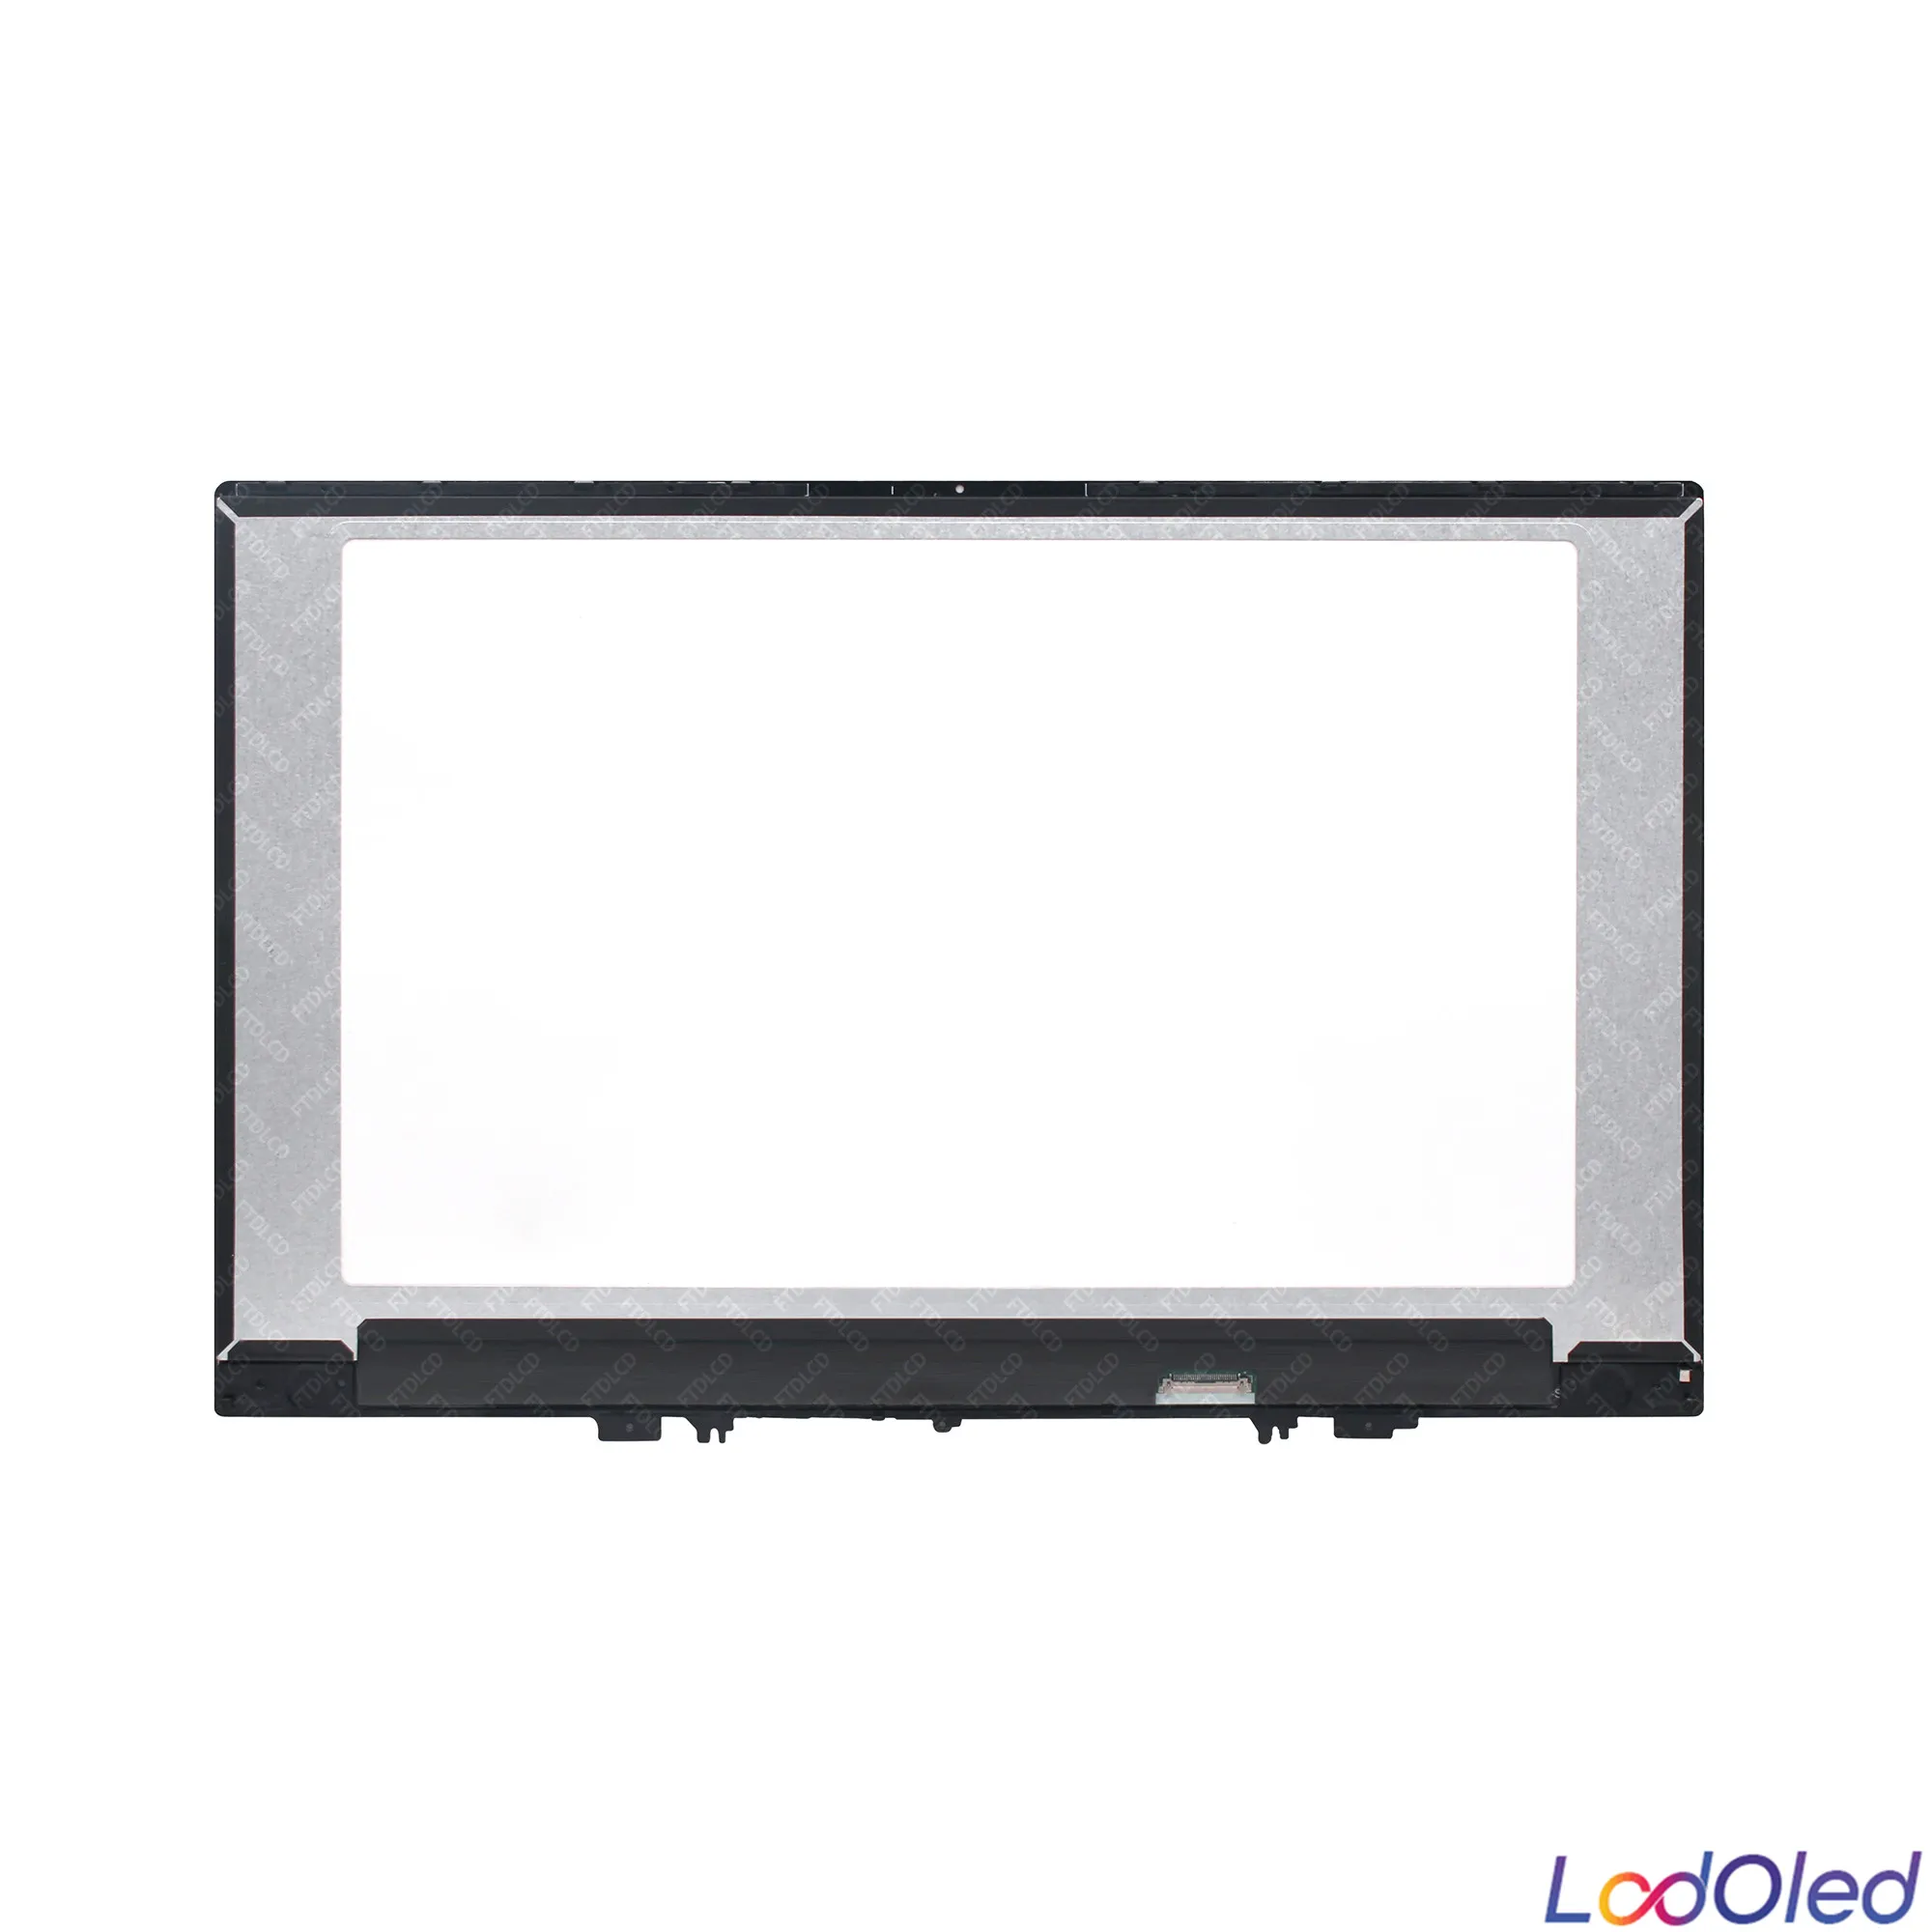 15 6 fhd ips lcd screen display panel glass assembly bezel frame lp156wfc spd2 for lenovo ideapad 530s 15ikb 81ev non touch free global shipping